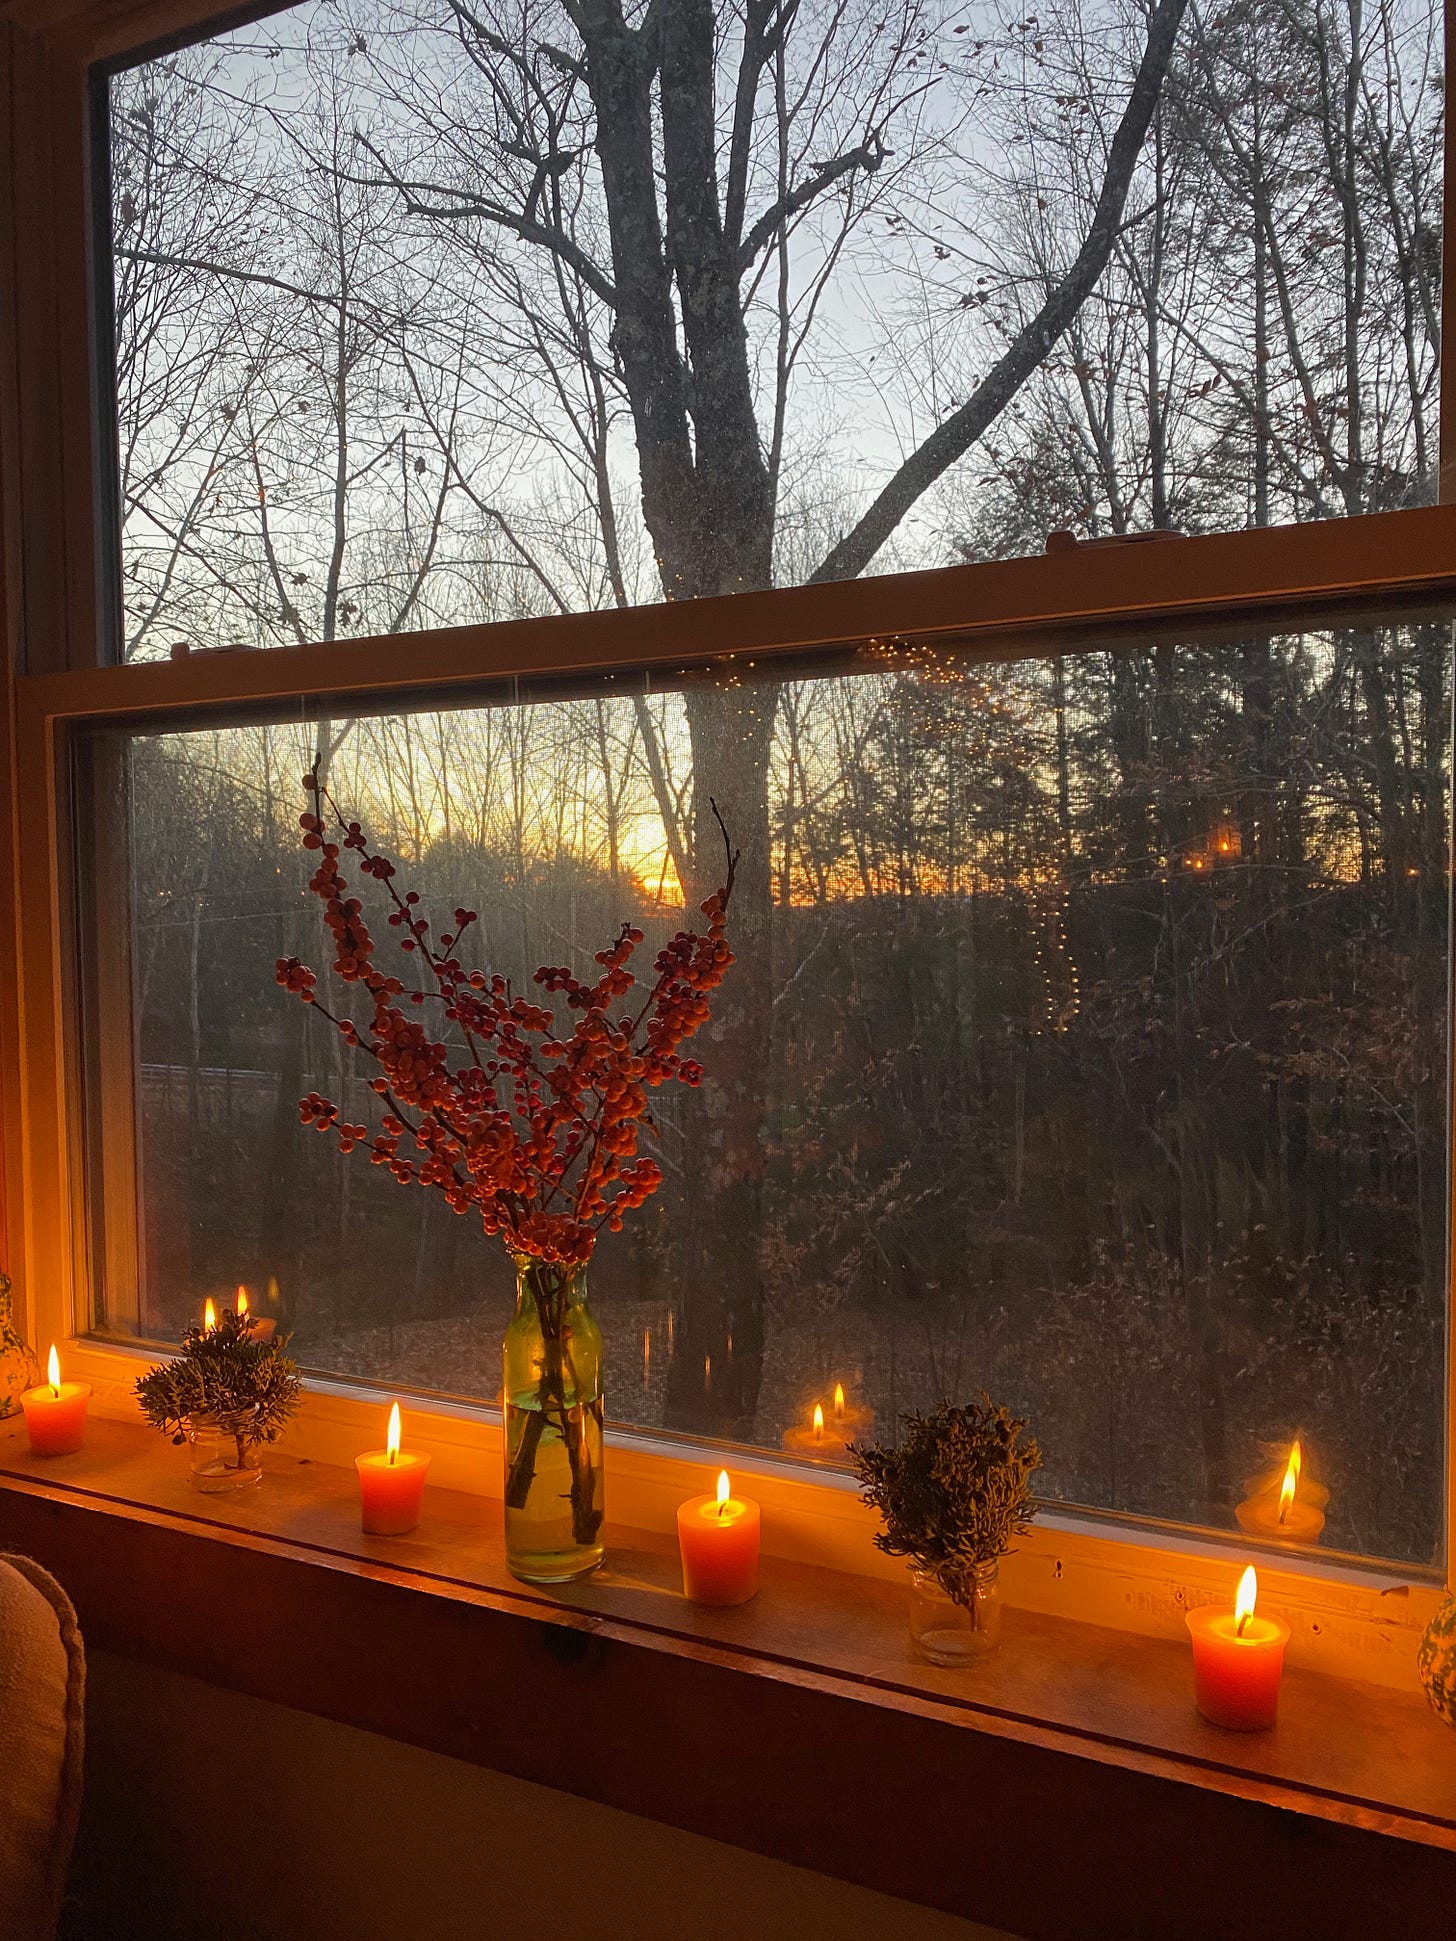 Four small beeswax candles on a windowsill. A large green vase of winterberry and two small glass jars of cedar sit between the candles. The view outside the window is dusky, with bare trees and a golden sun setting on the horizon.